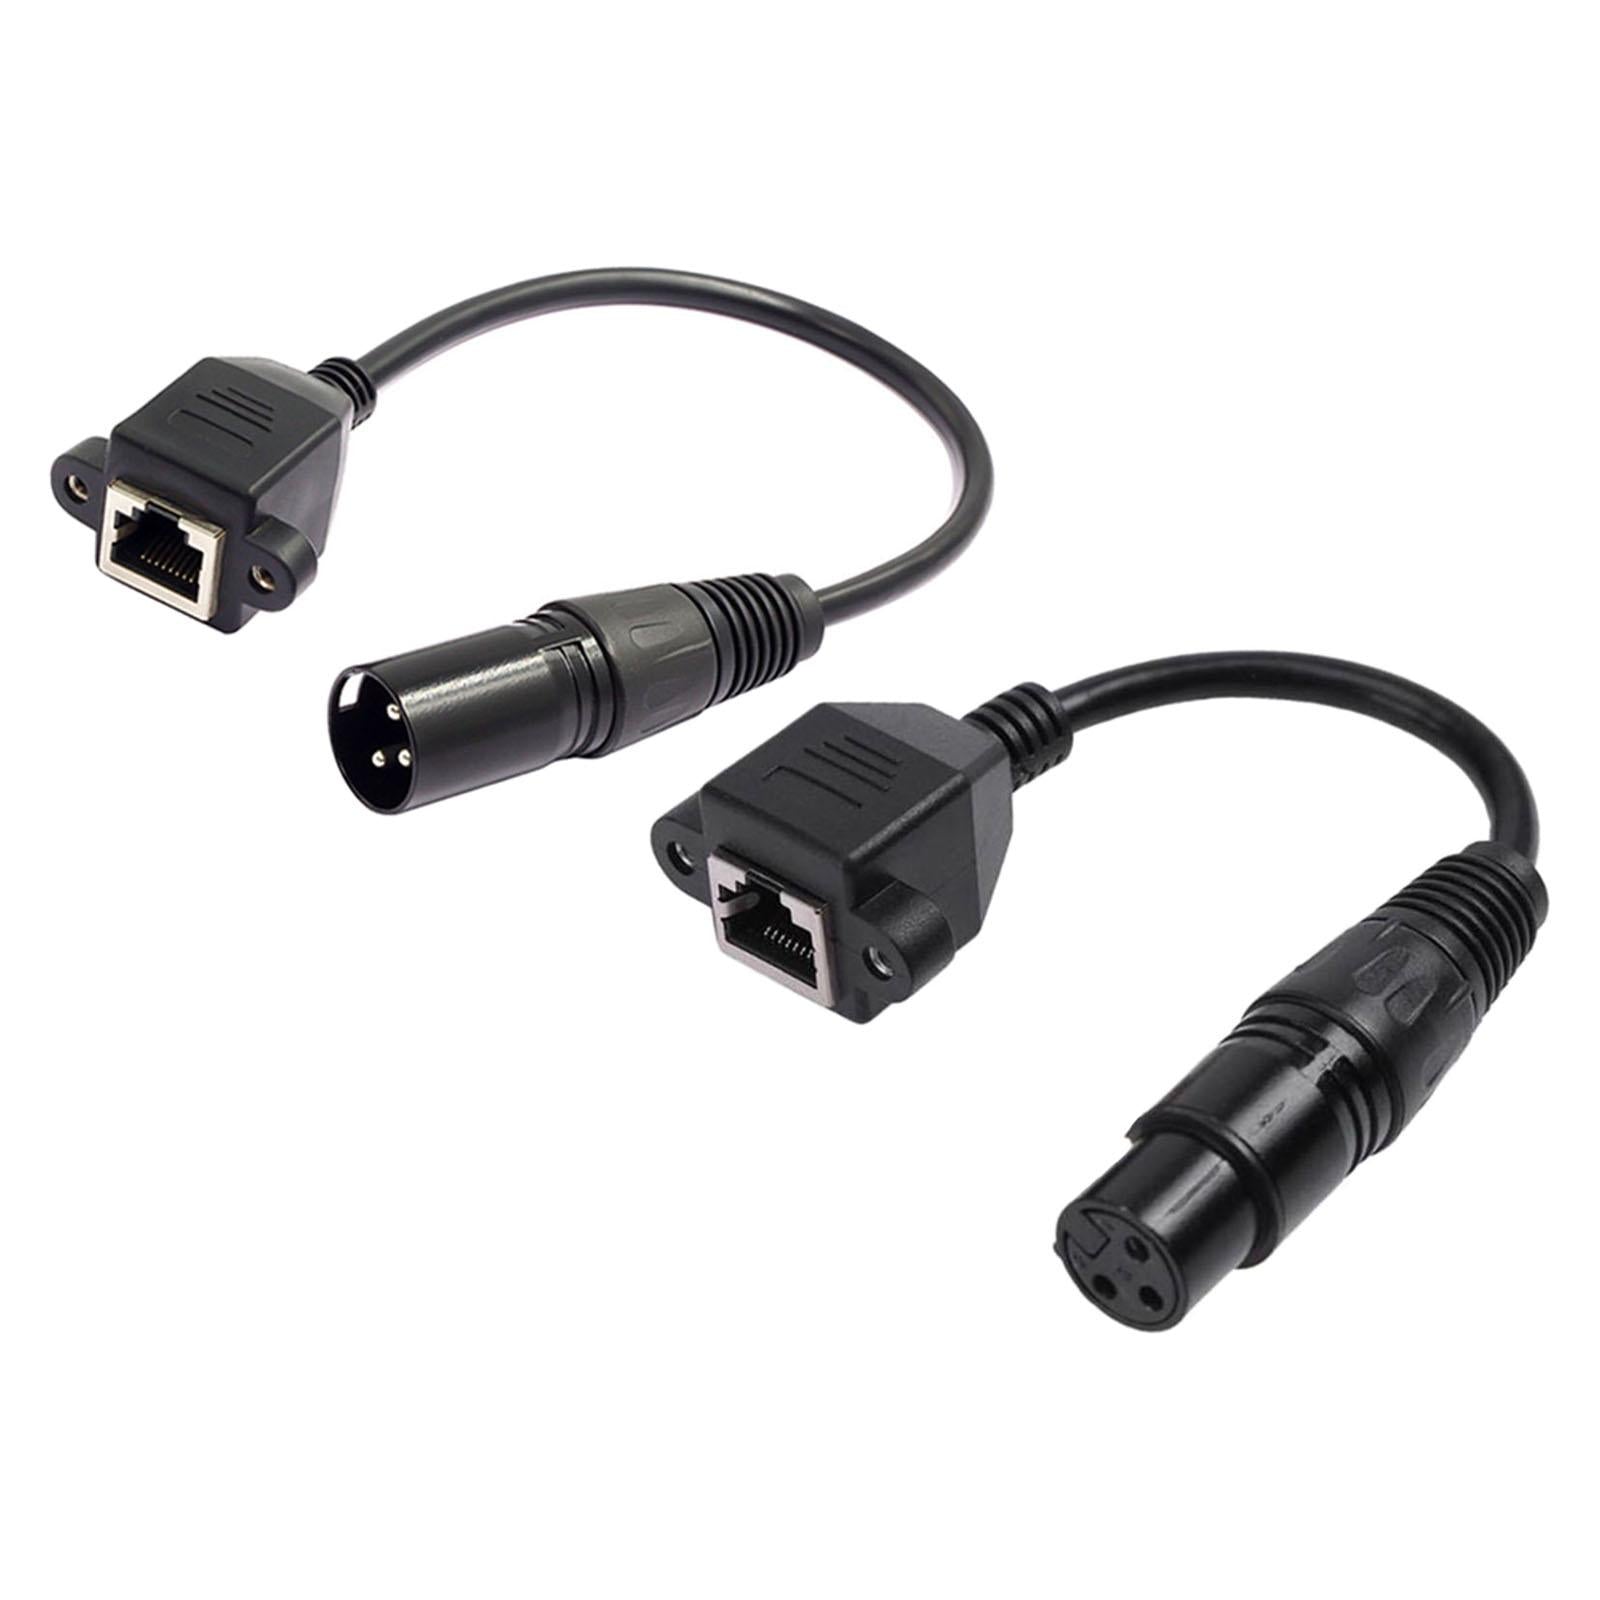 1 Pair 3 Pin XLR to RJ 45 Male Female Adapter Cables for DMX CON Controller